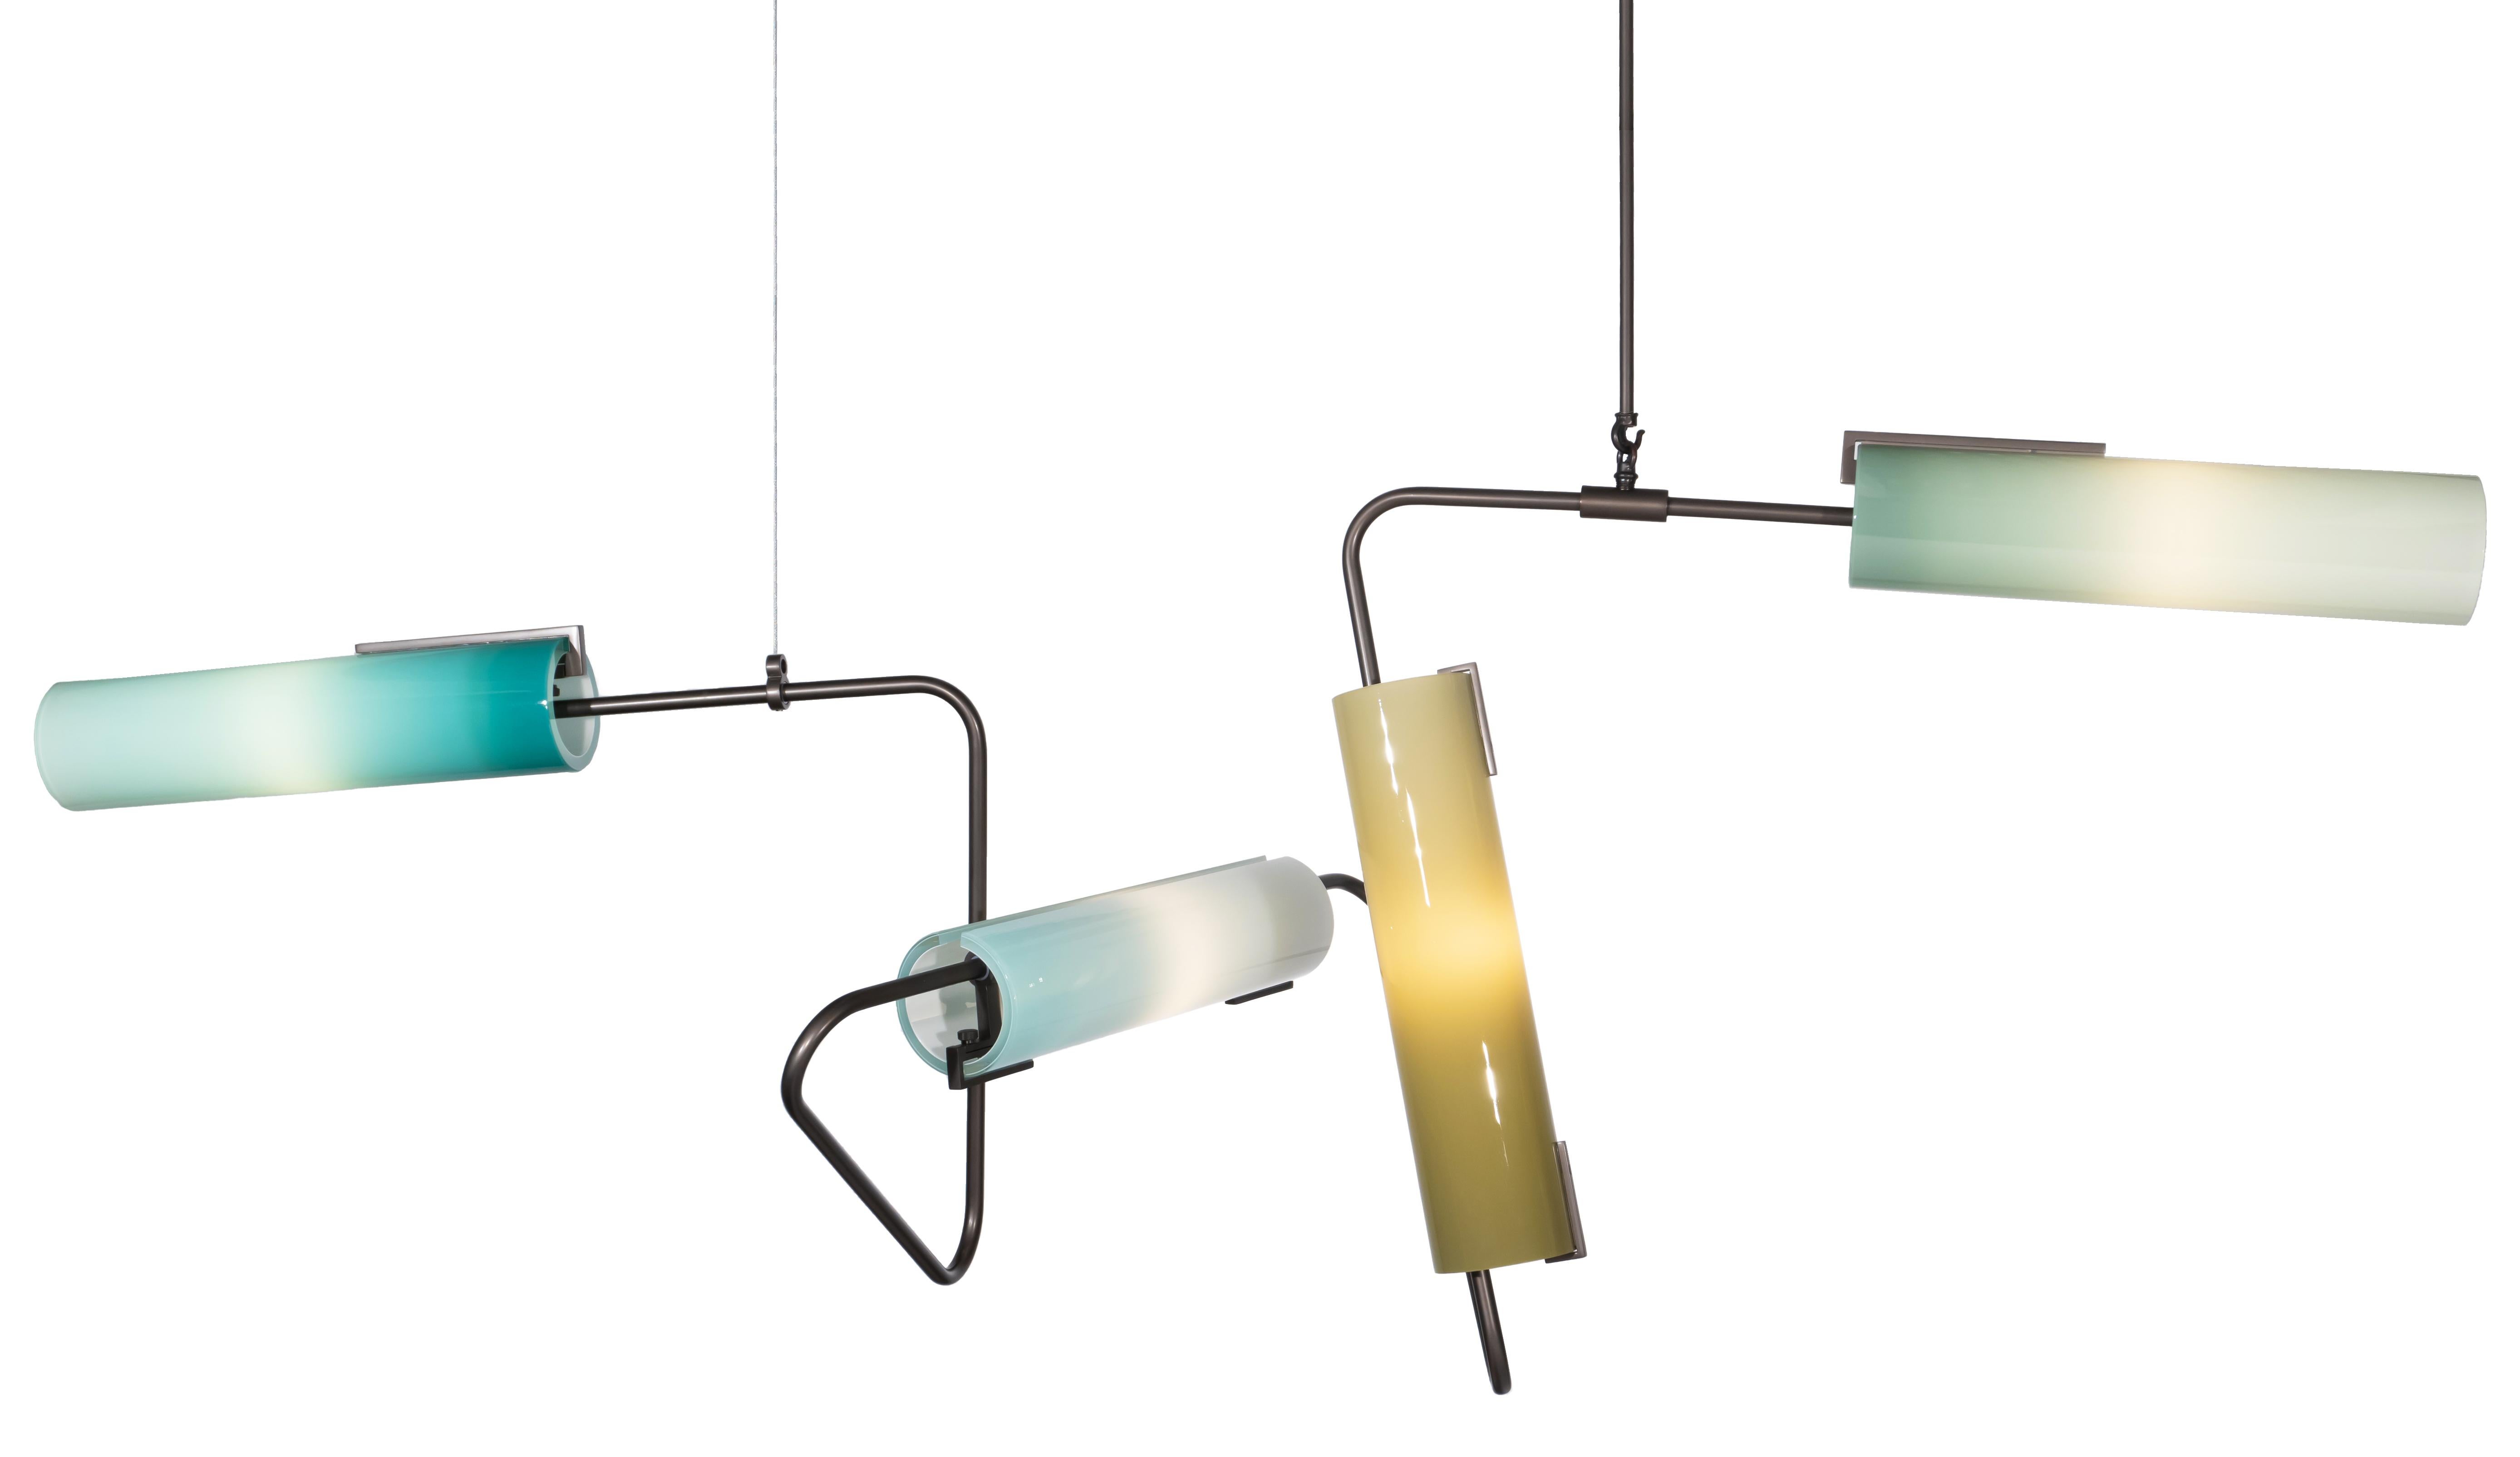 The Continuum Collection was inspired by New York’s vibrant street art. The structure utilizes custom bent tubes that can be connected and arranged in a variety of ways to produce a multiple styles and sizes. The hand blown glass shades are